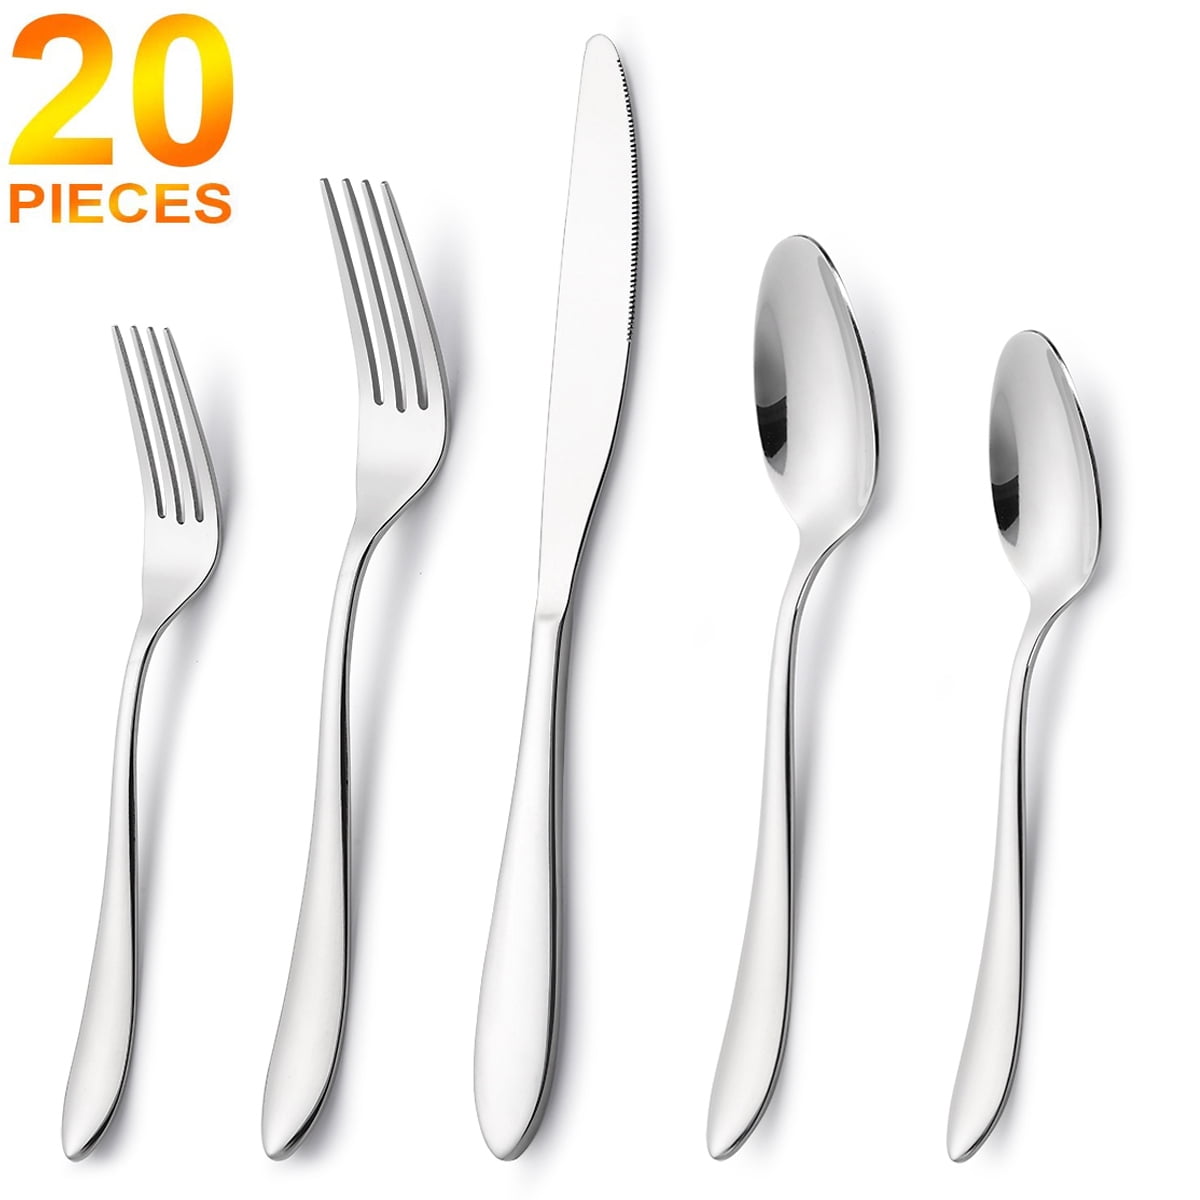 Dining Set Cutlery Set Stainless Steel Cutlary Set Eating Knives Forks Spoons 